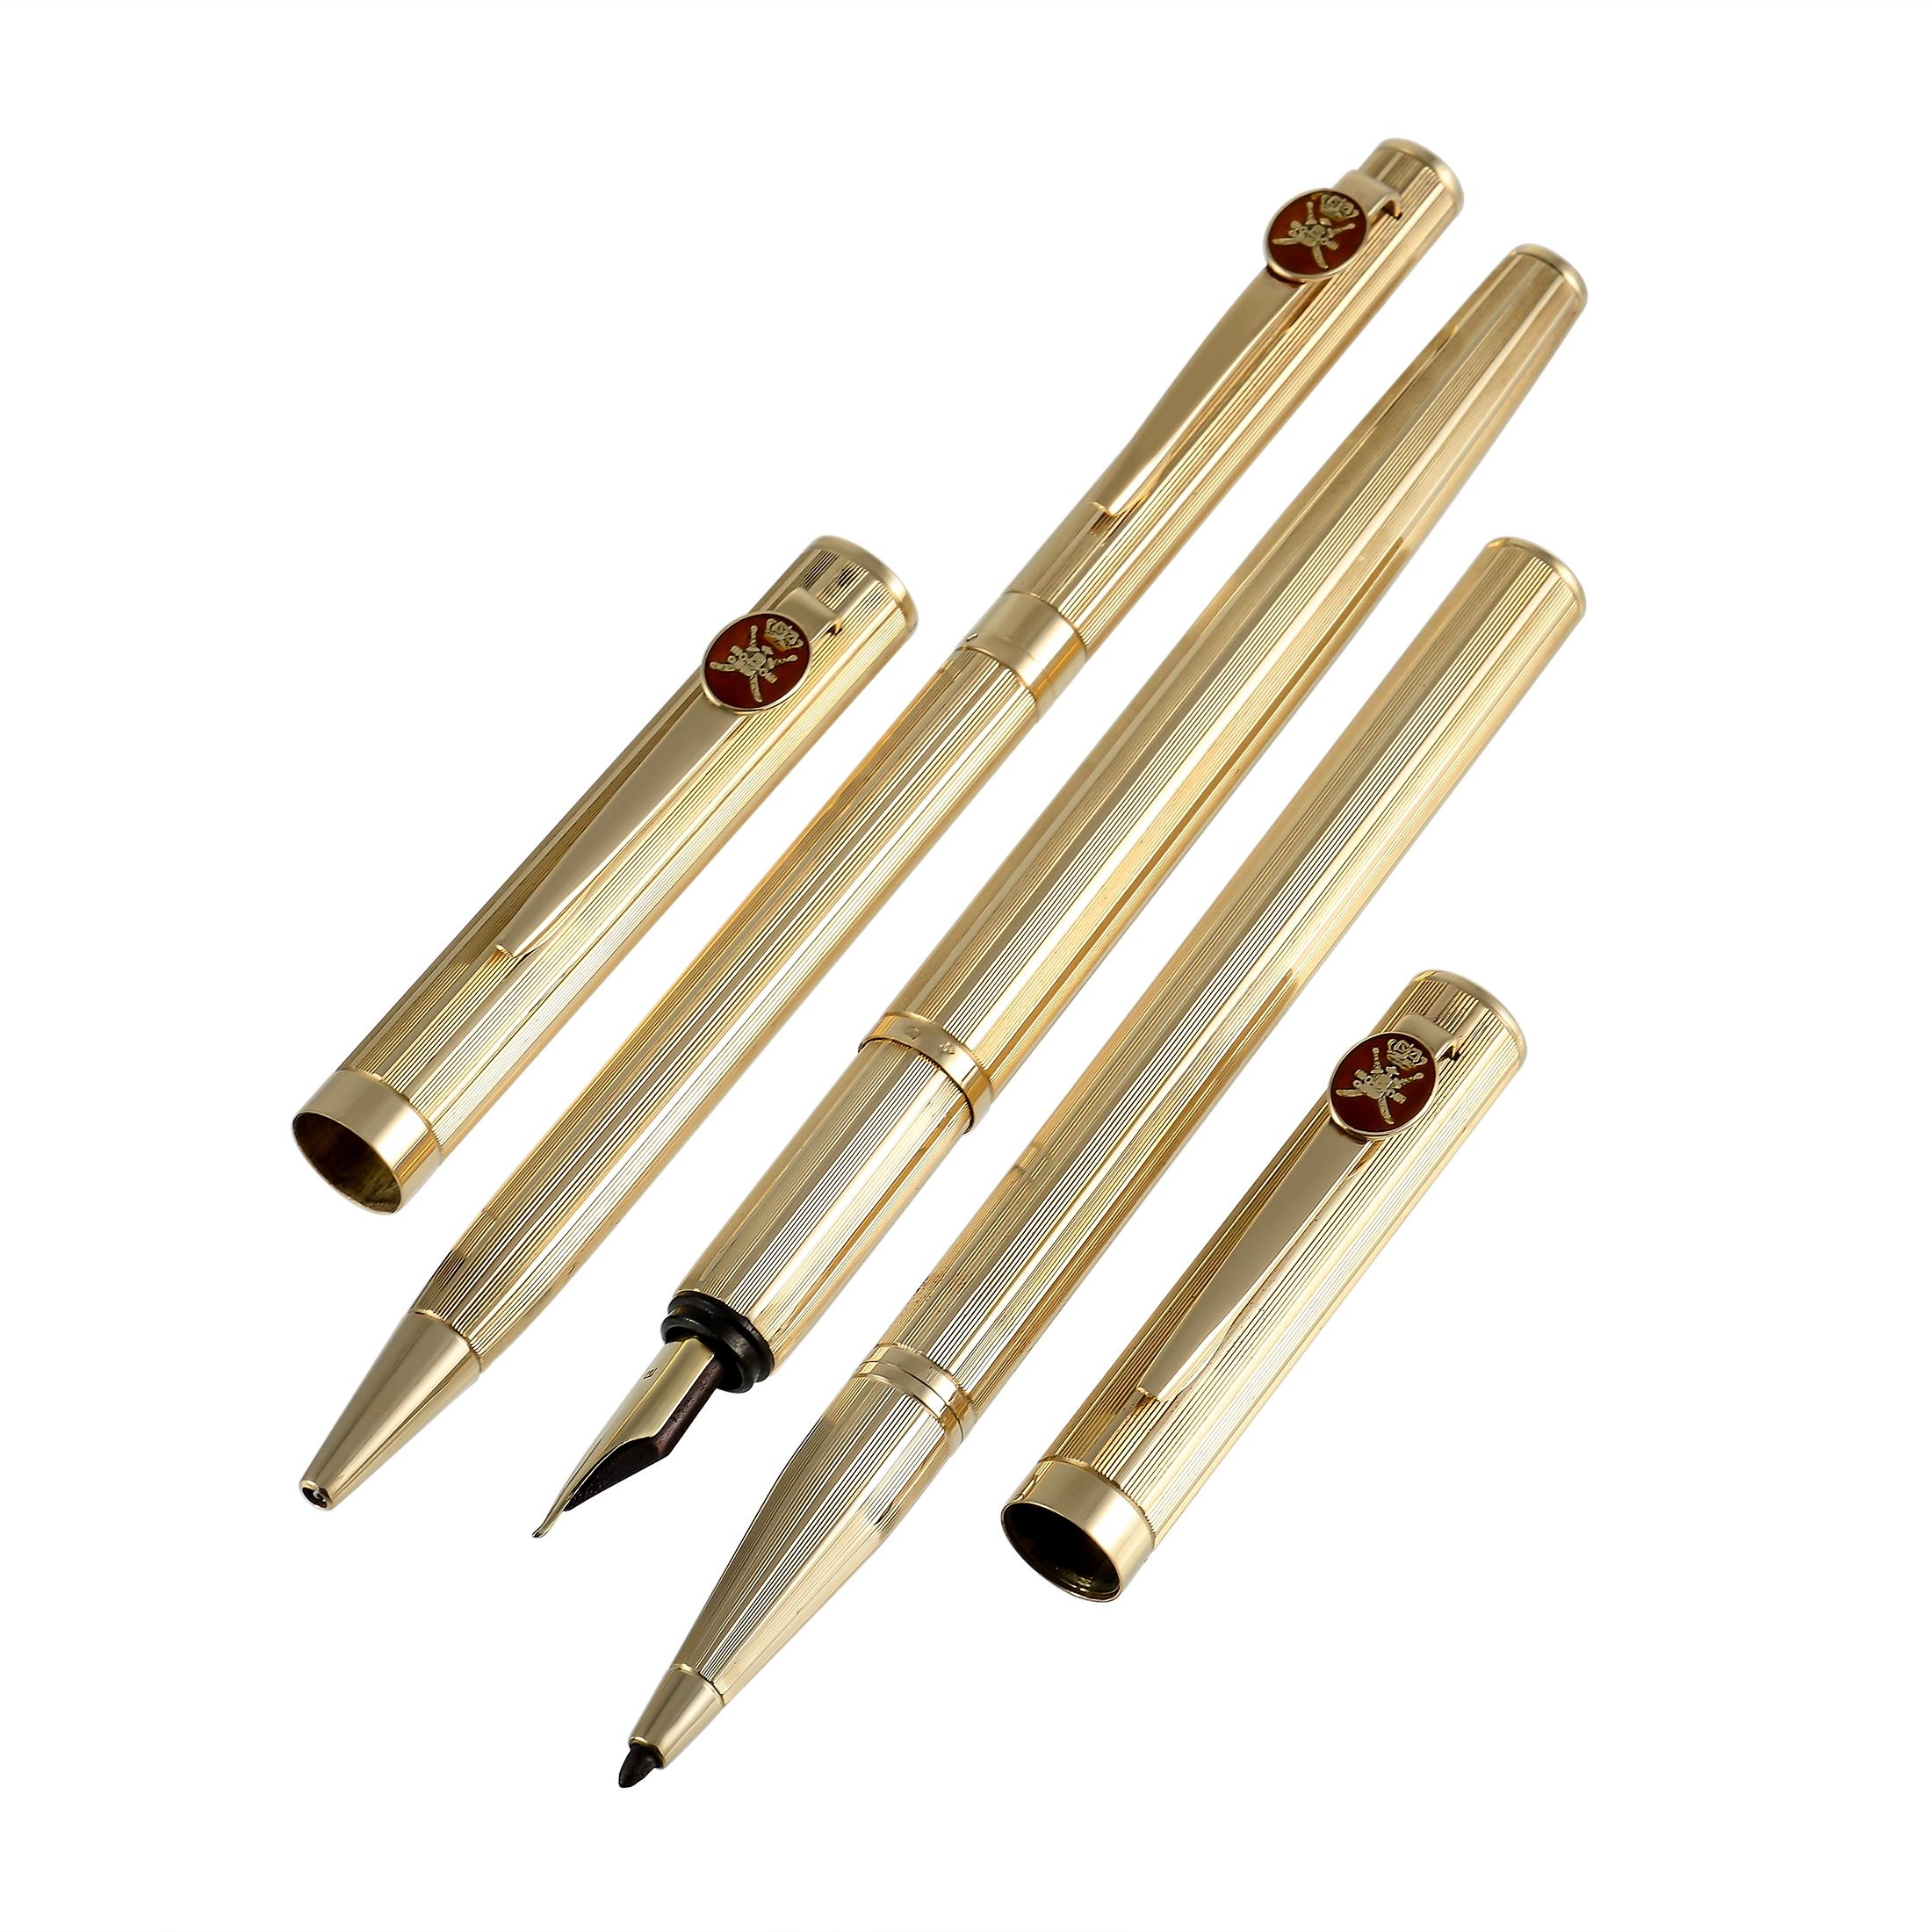 This gorgeous set of three 18K textured yellow gold pens were made by Royama and gifted by the Sultan of Oman. Each pen features the Khanjar, the national emblem of Oman, against a red enamel background. One pen features a fountain tip, one is a